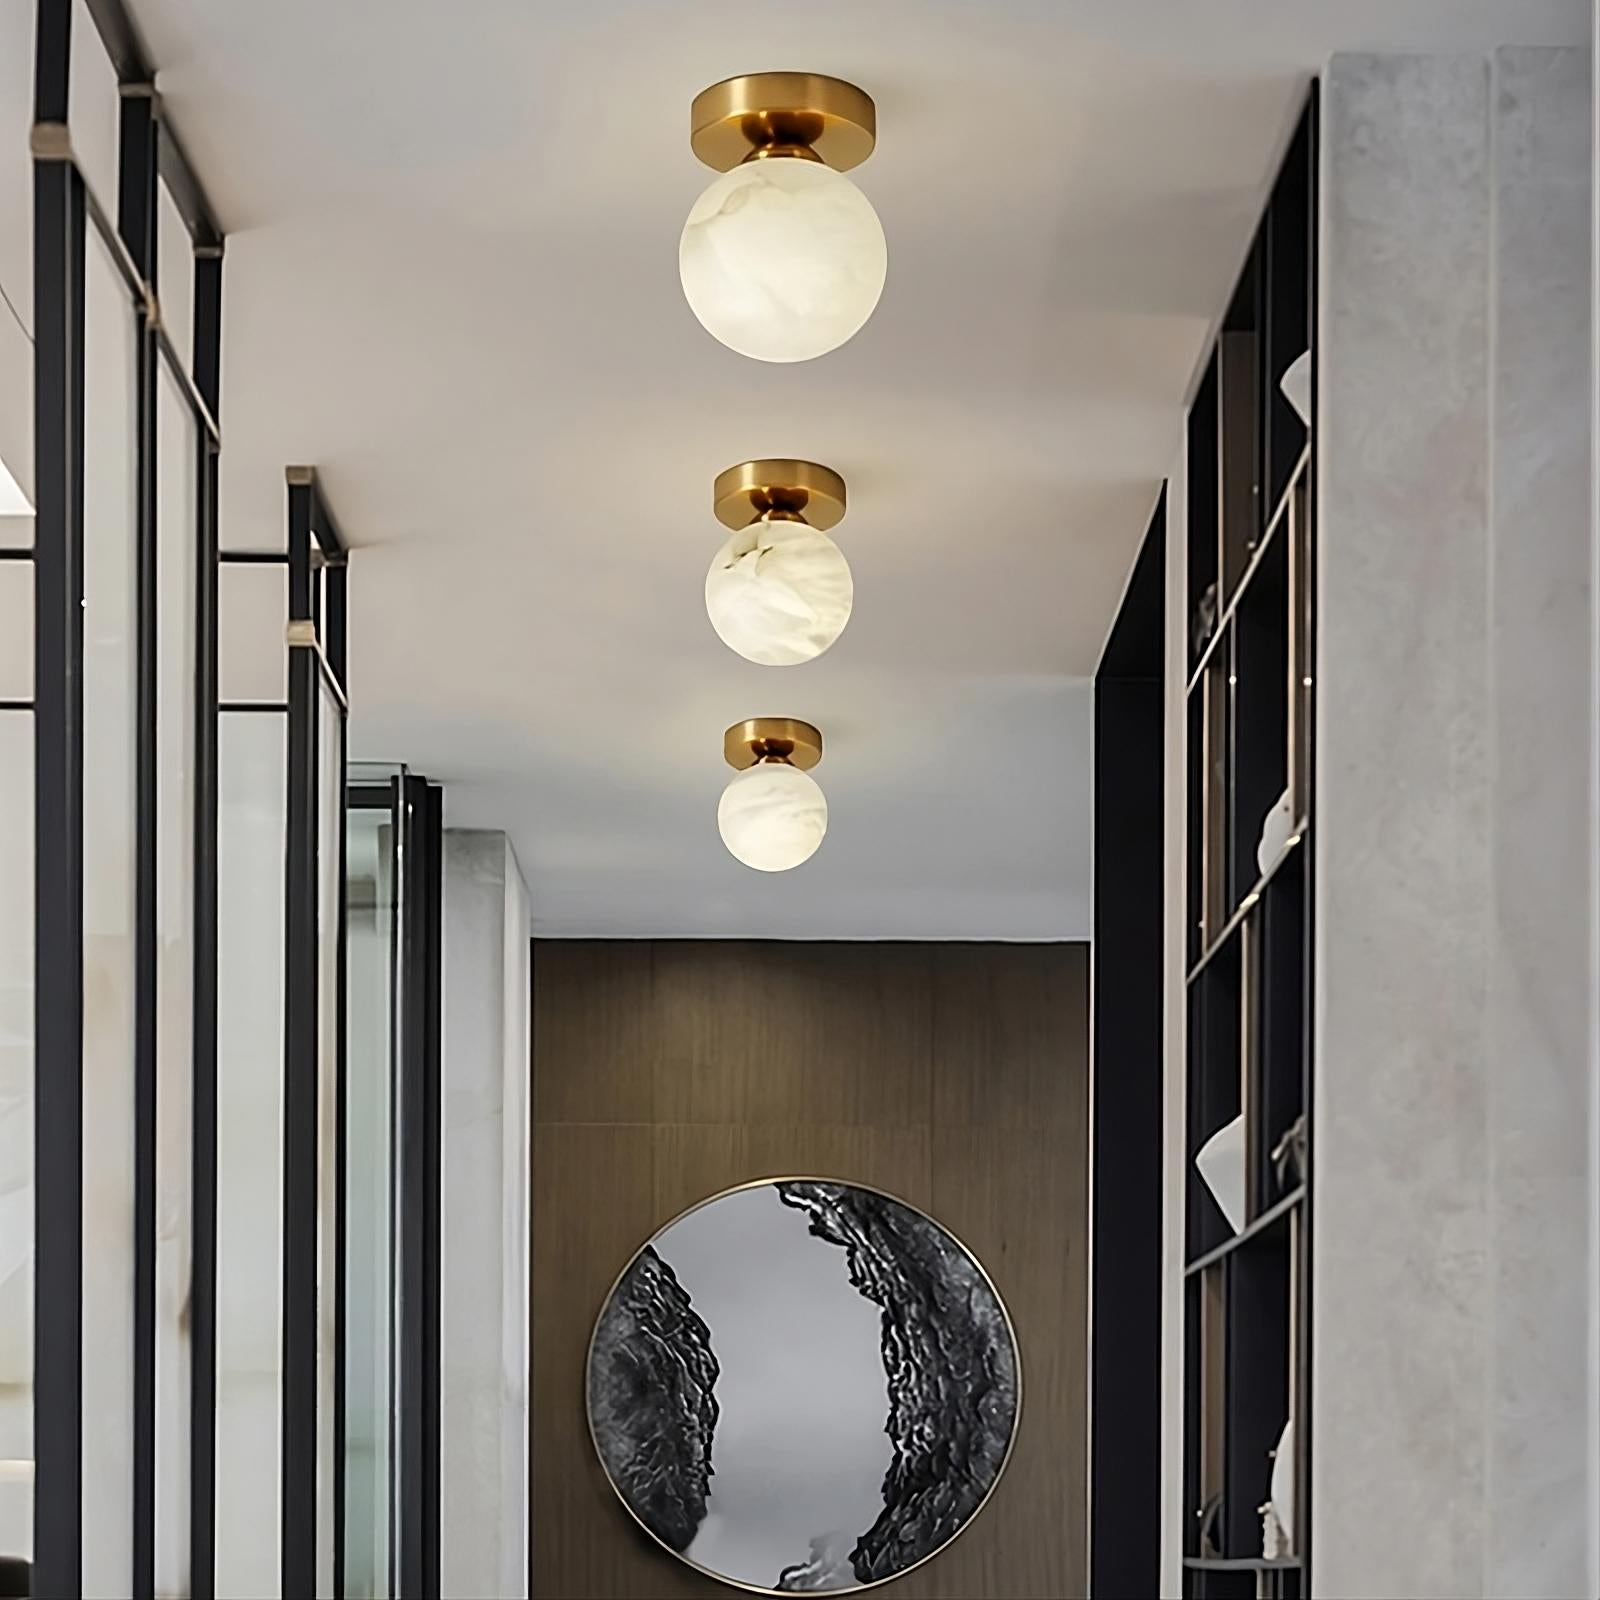 A modern hallway with three round Natural Marble Hallway Ceiling Light Fixtures by Morsale.com featuring gold bases and frosted globes. The floor has a reflective circular mirror mounted on a dark wooden panel, while the walls have metal and glass shelving units. The decor is minimalistic and elegant, enhanced by Spanish marble accents throughout.